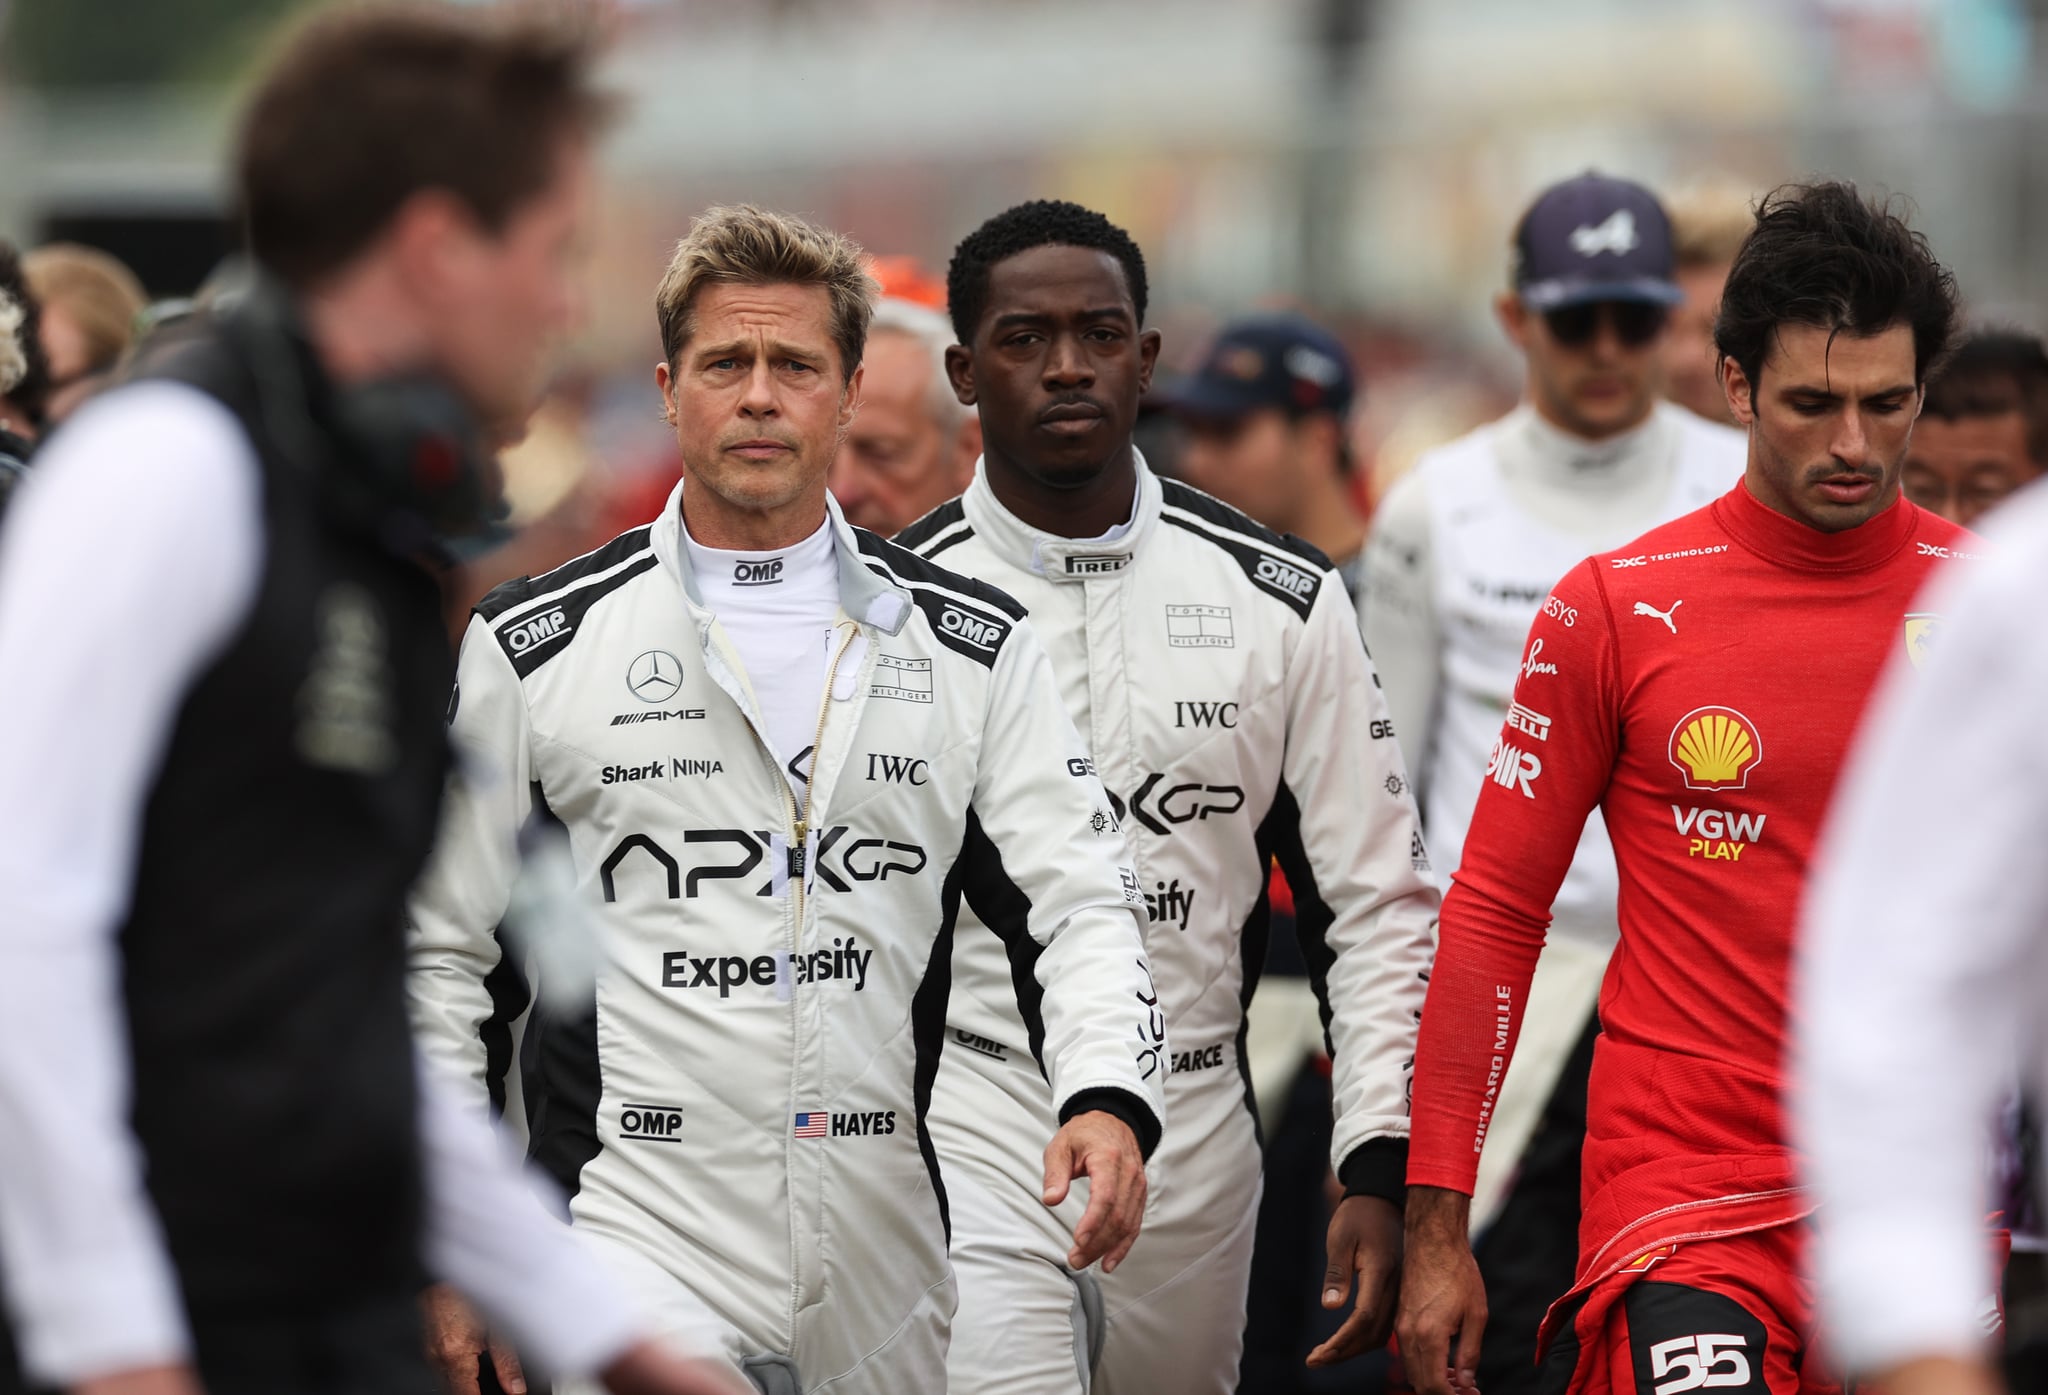 NORTHAMPTON, ENGLAND - JULY 09:  Brad Pitt, star of the upcoming Formula One based movie, Apex, and Damson Idris, co-star of the upcoming Formula One based movie, Apex, walk on the grid in front of Carlos Sainz of Spain driving (55) the Ferrari SF-23 on track during the F1 Grand Prix of Great Britain at Silverstone Circuit on July 09, 2023 in Northampton, England. (Photo by Ryan Pierse/Getty Images)